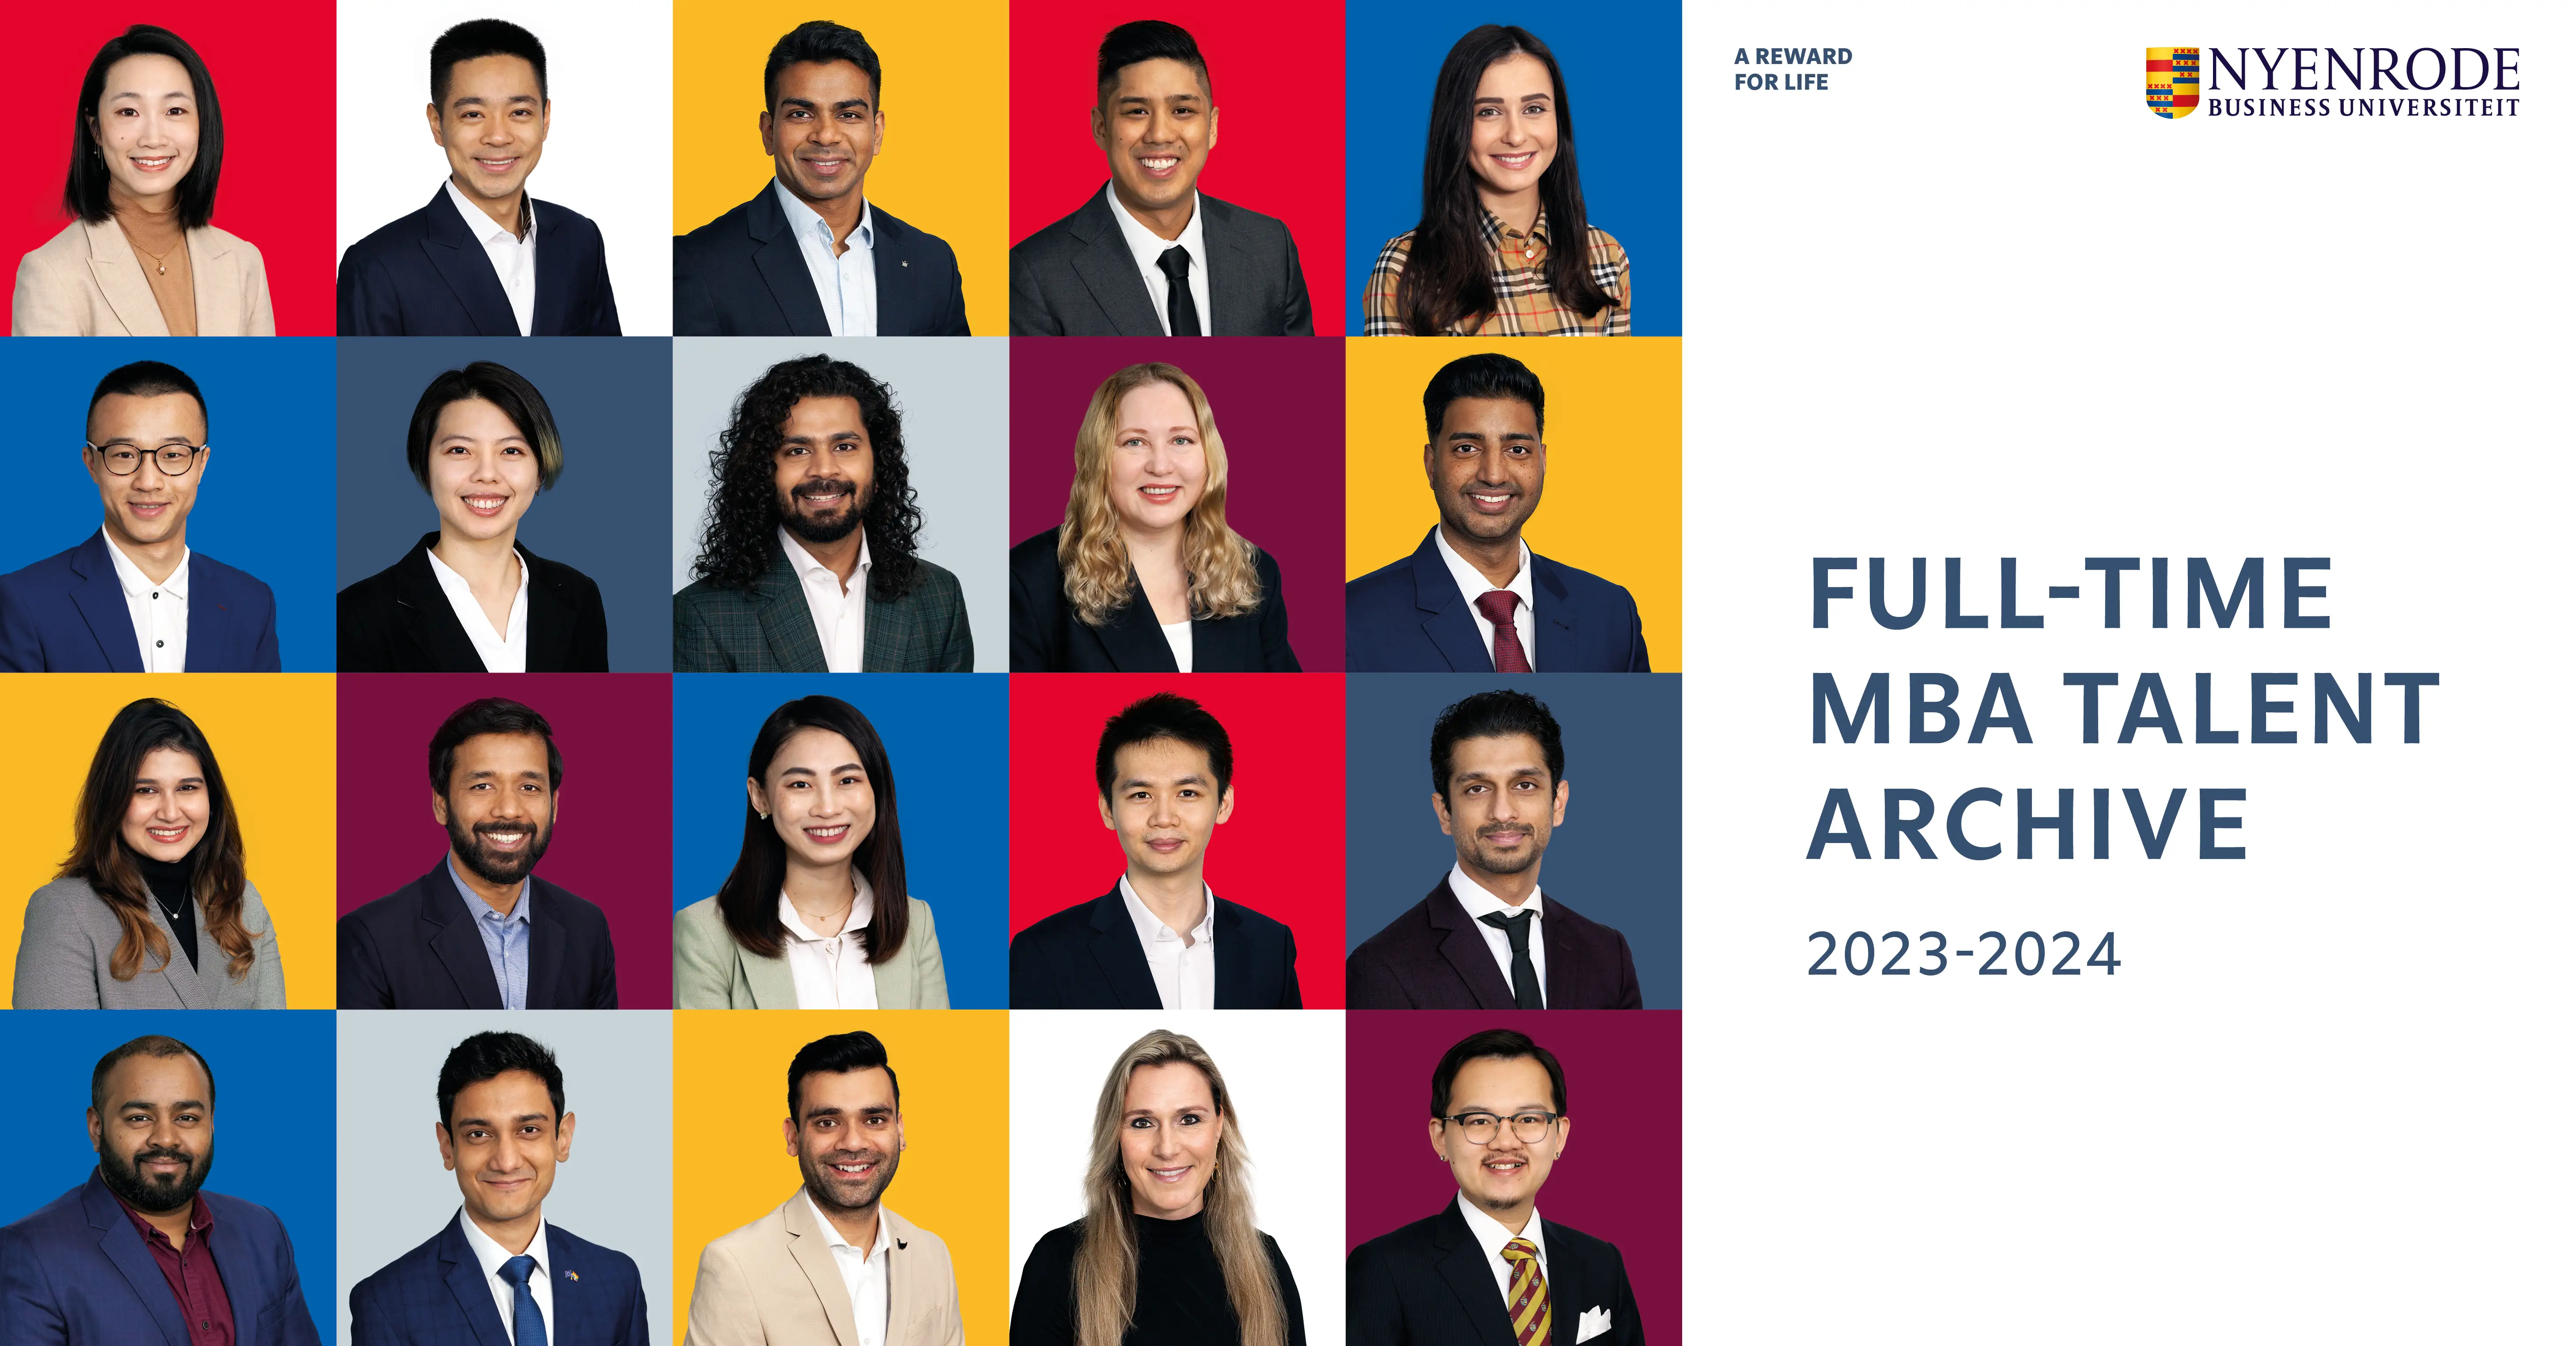 Nyenrode Talent Archive Full-time MBA Class of 2023-2024